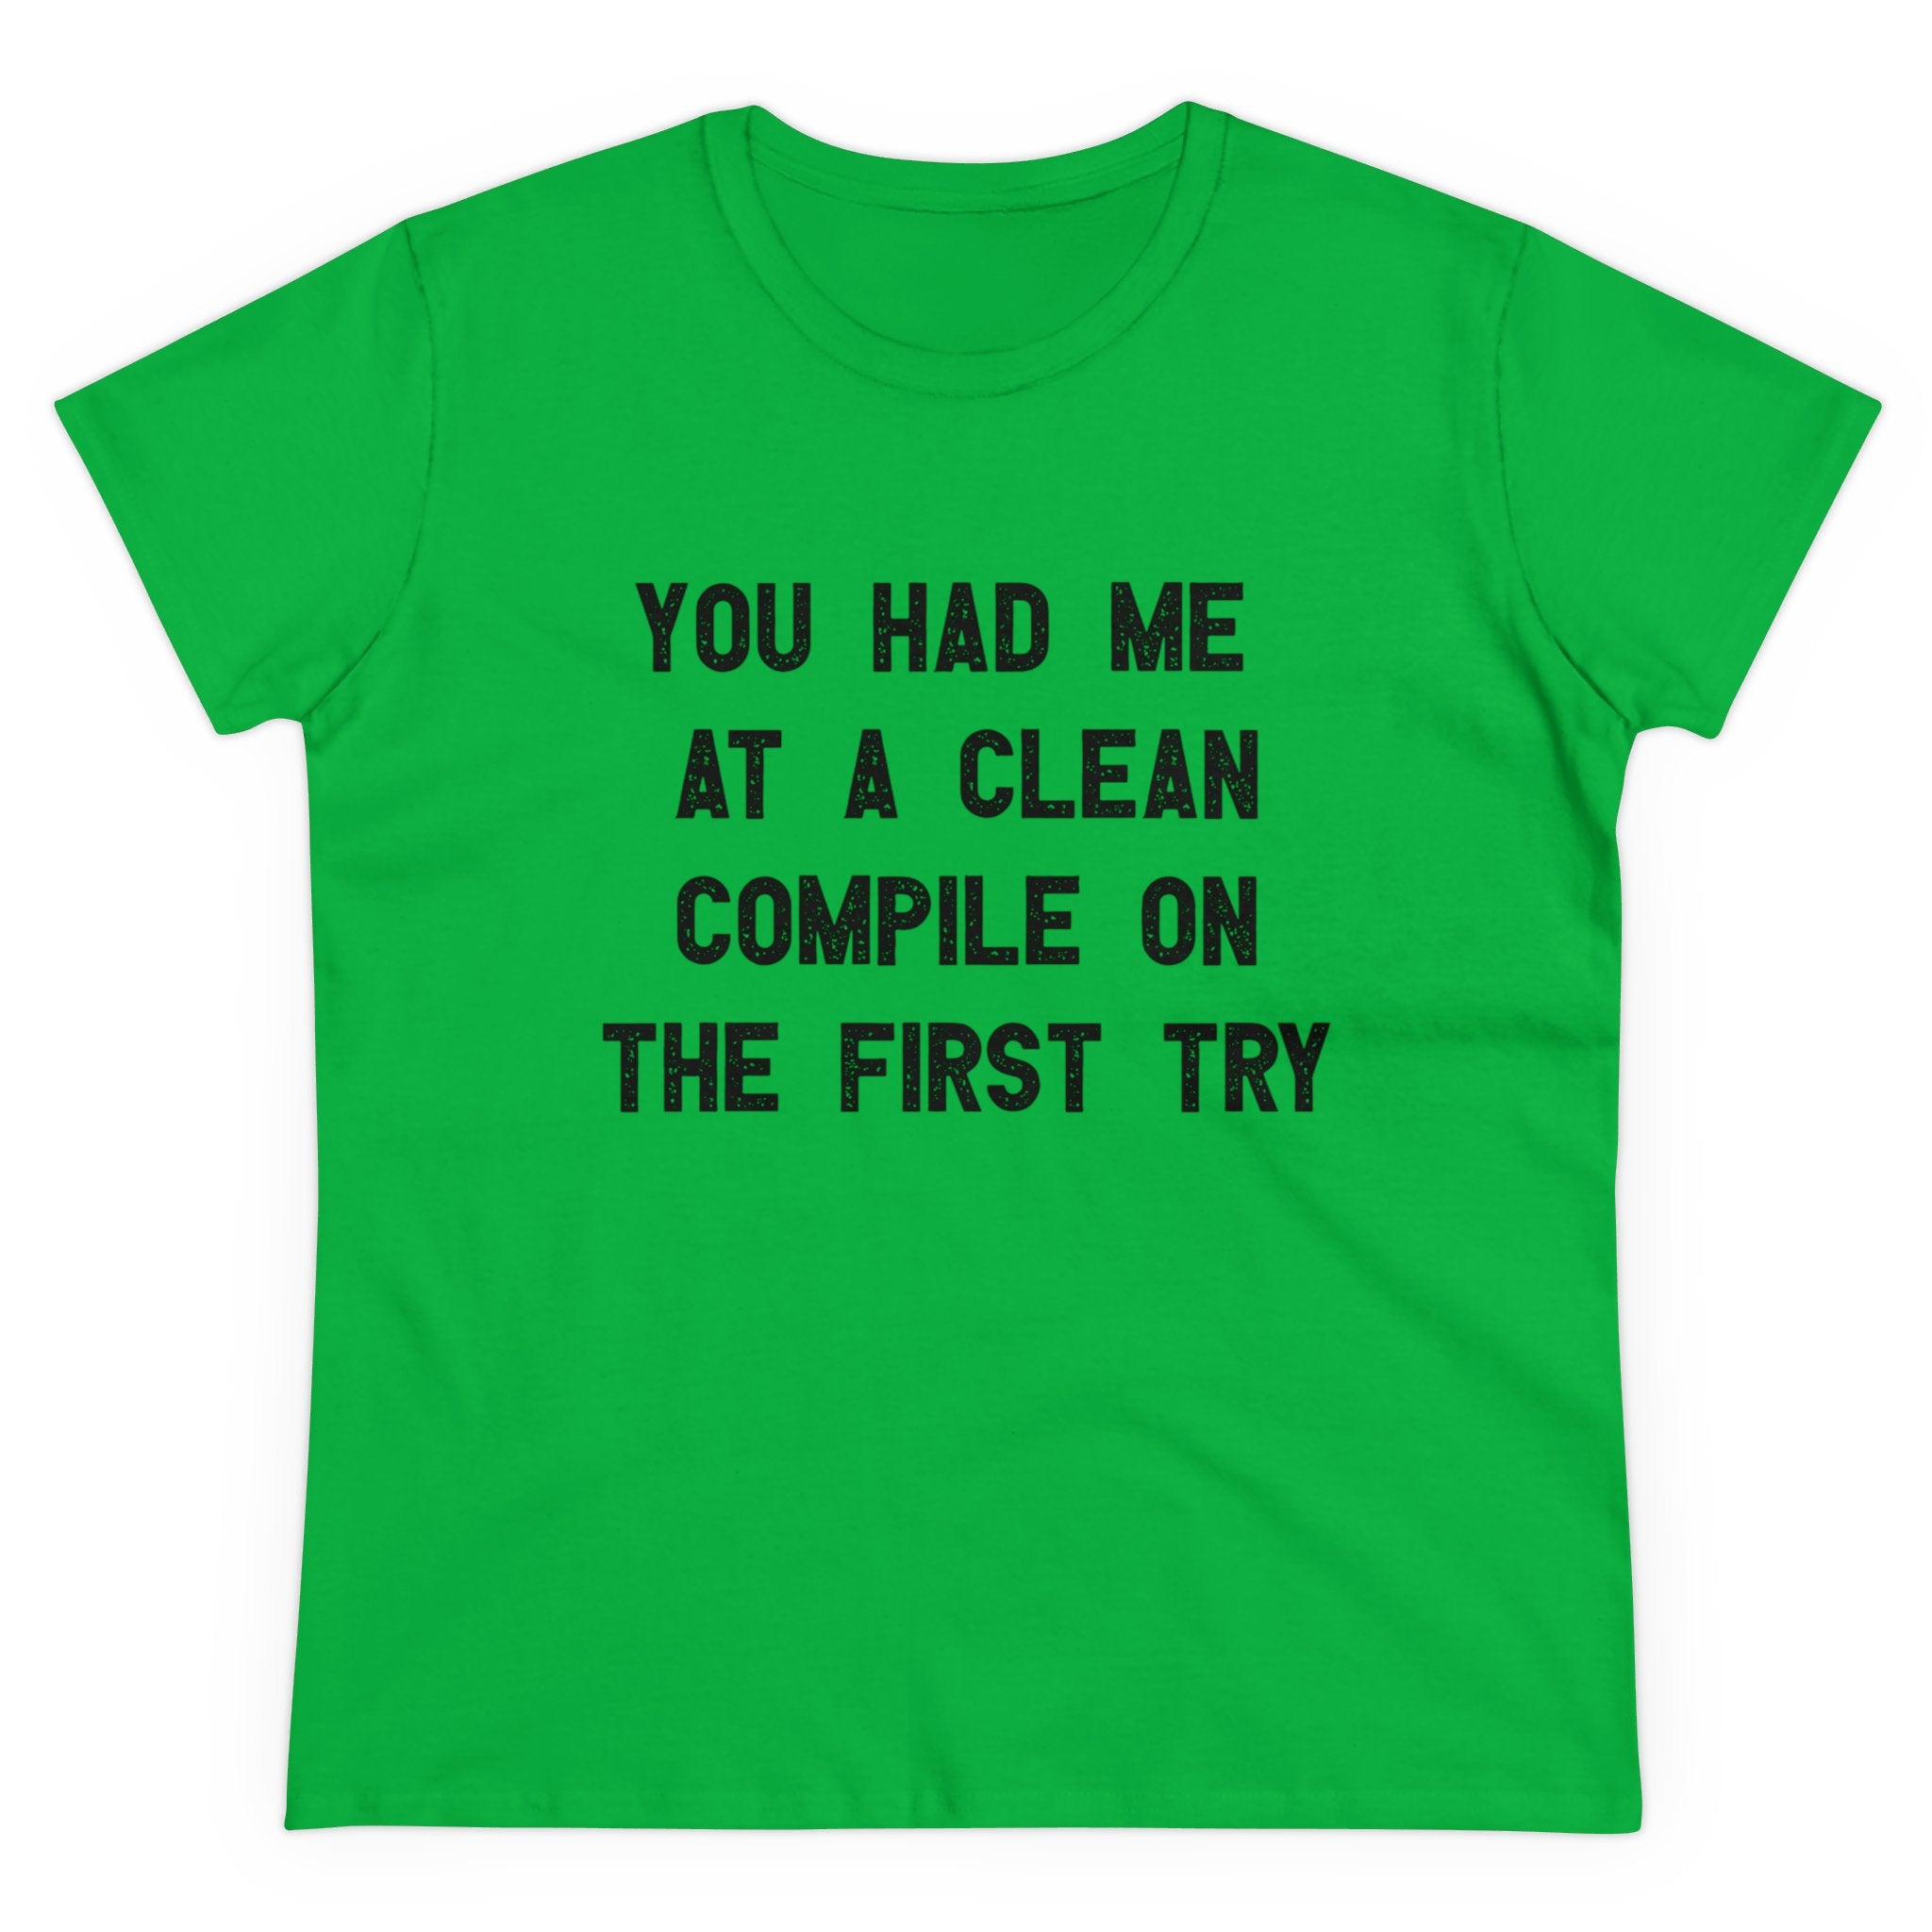 You Had Me At a Clean Compile on the First Try - Women's Tee